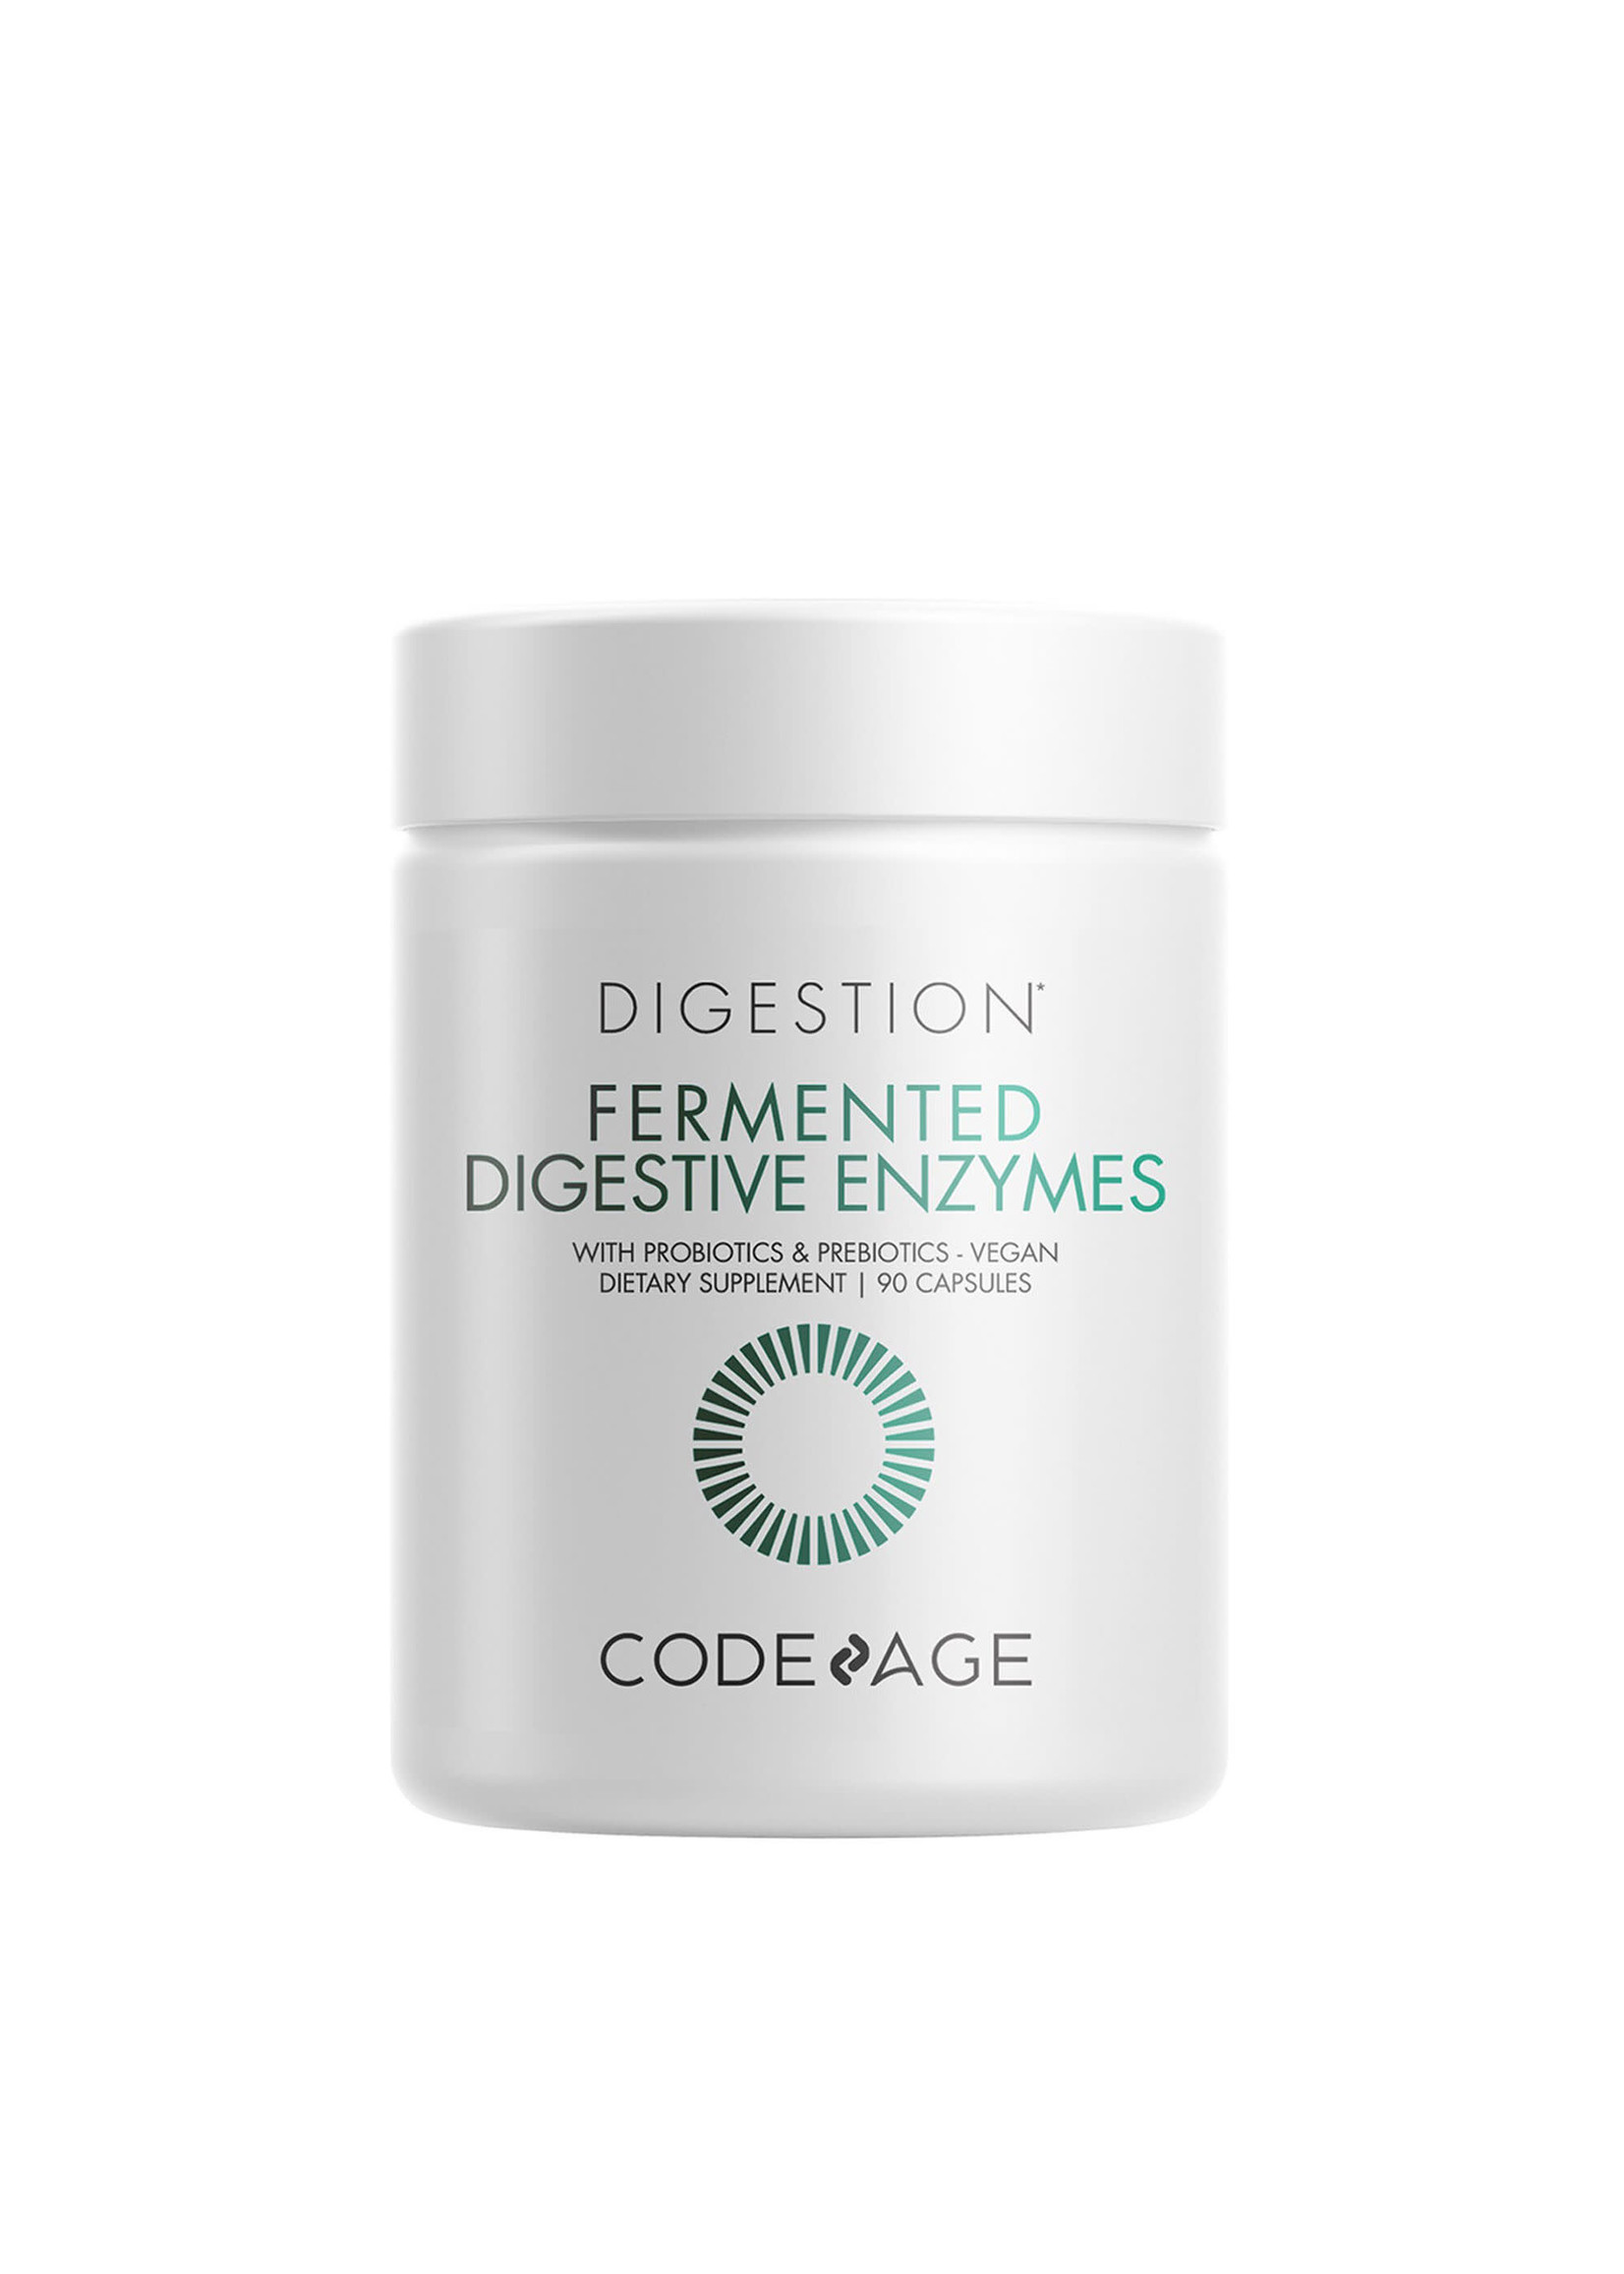 CodeAge CodeAge-Digestion Fermented Diges Enzymes